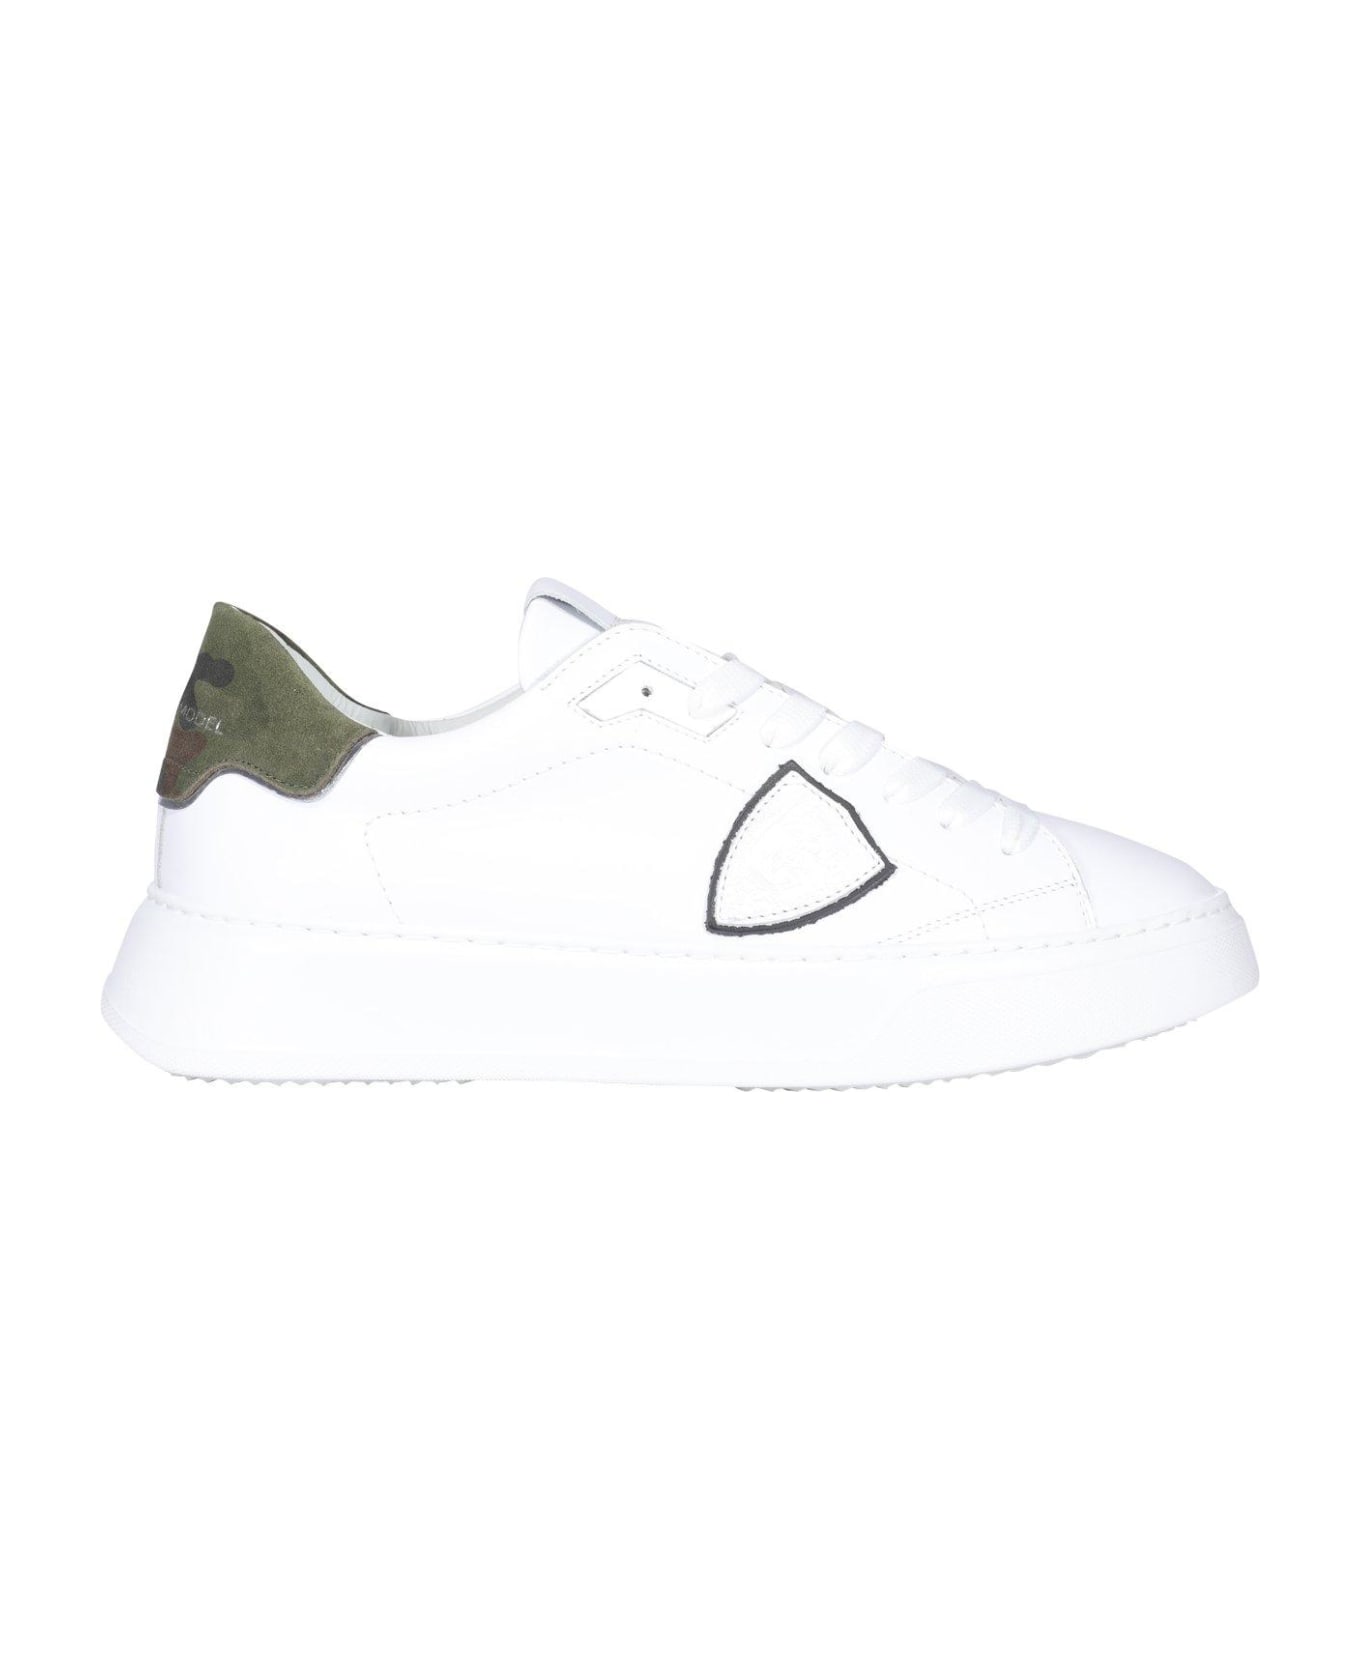 Philippe Model Temple Veau Camouflage Sneakers - Bianco e Verde